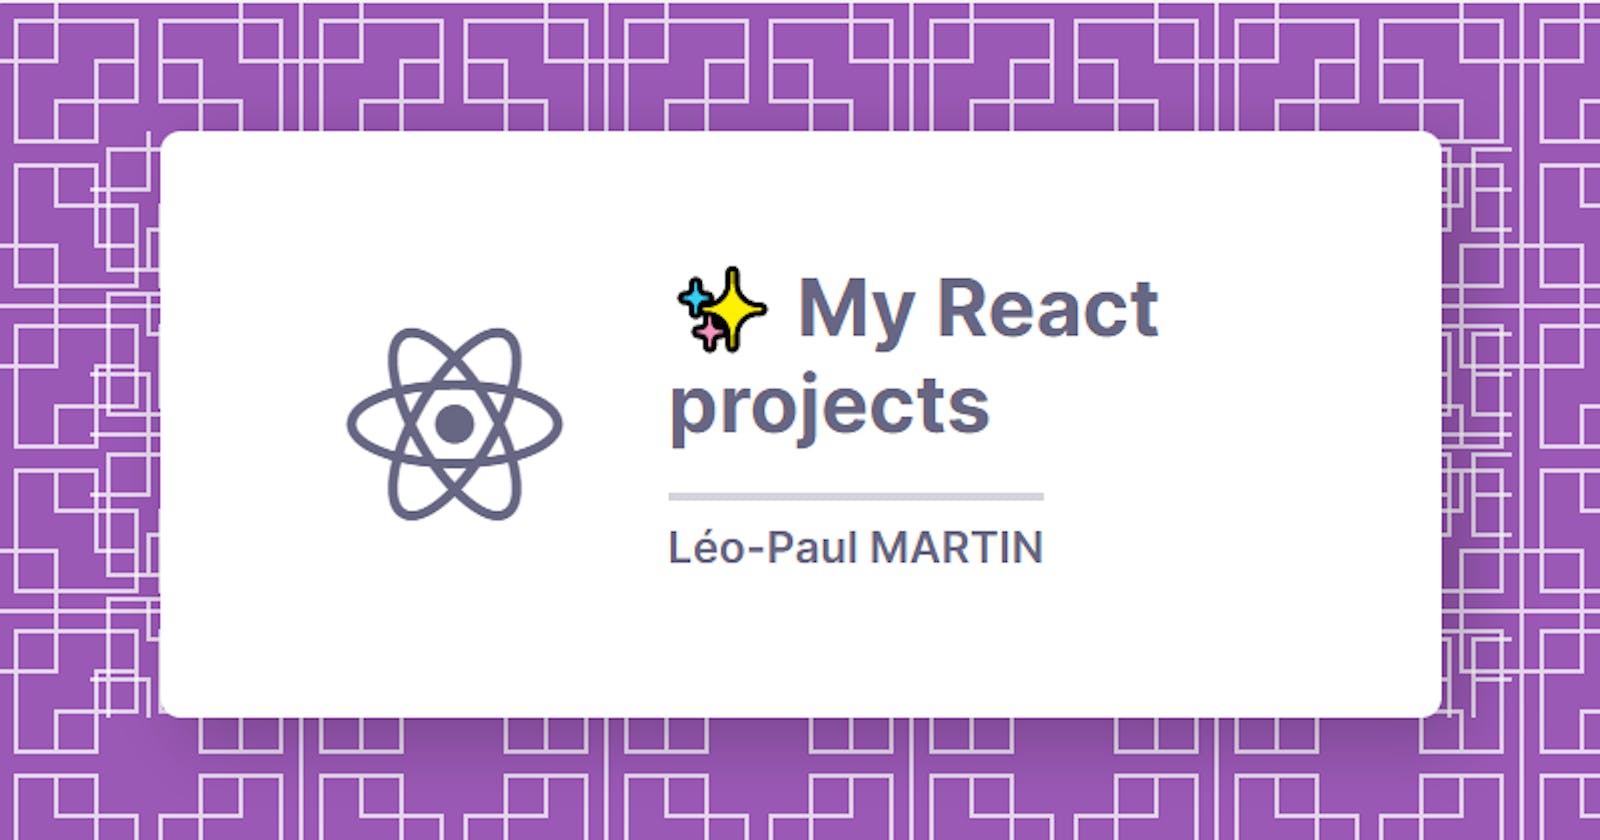 ✨ My React projects